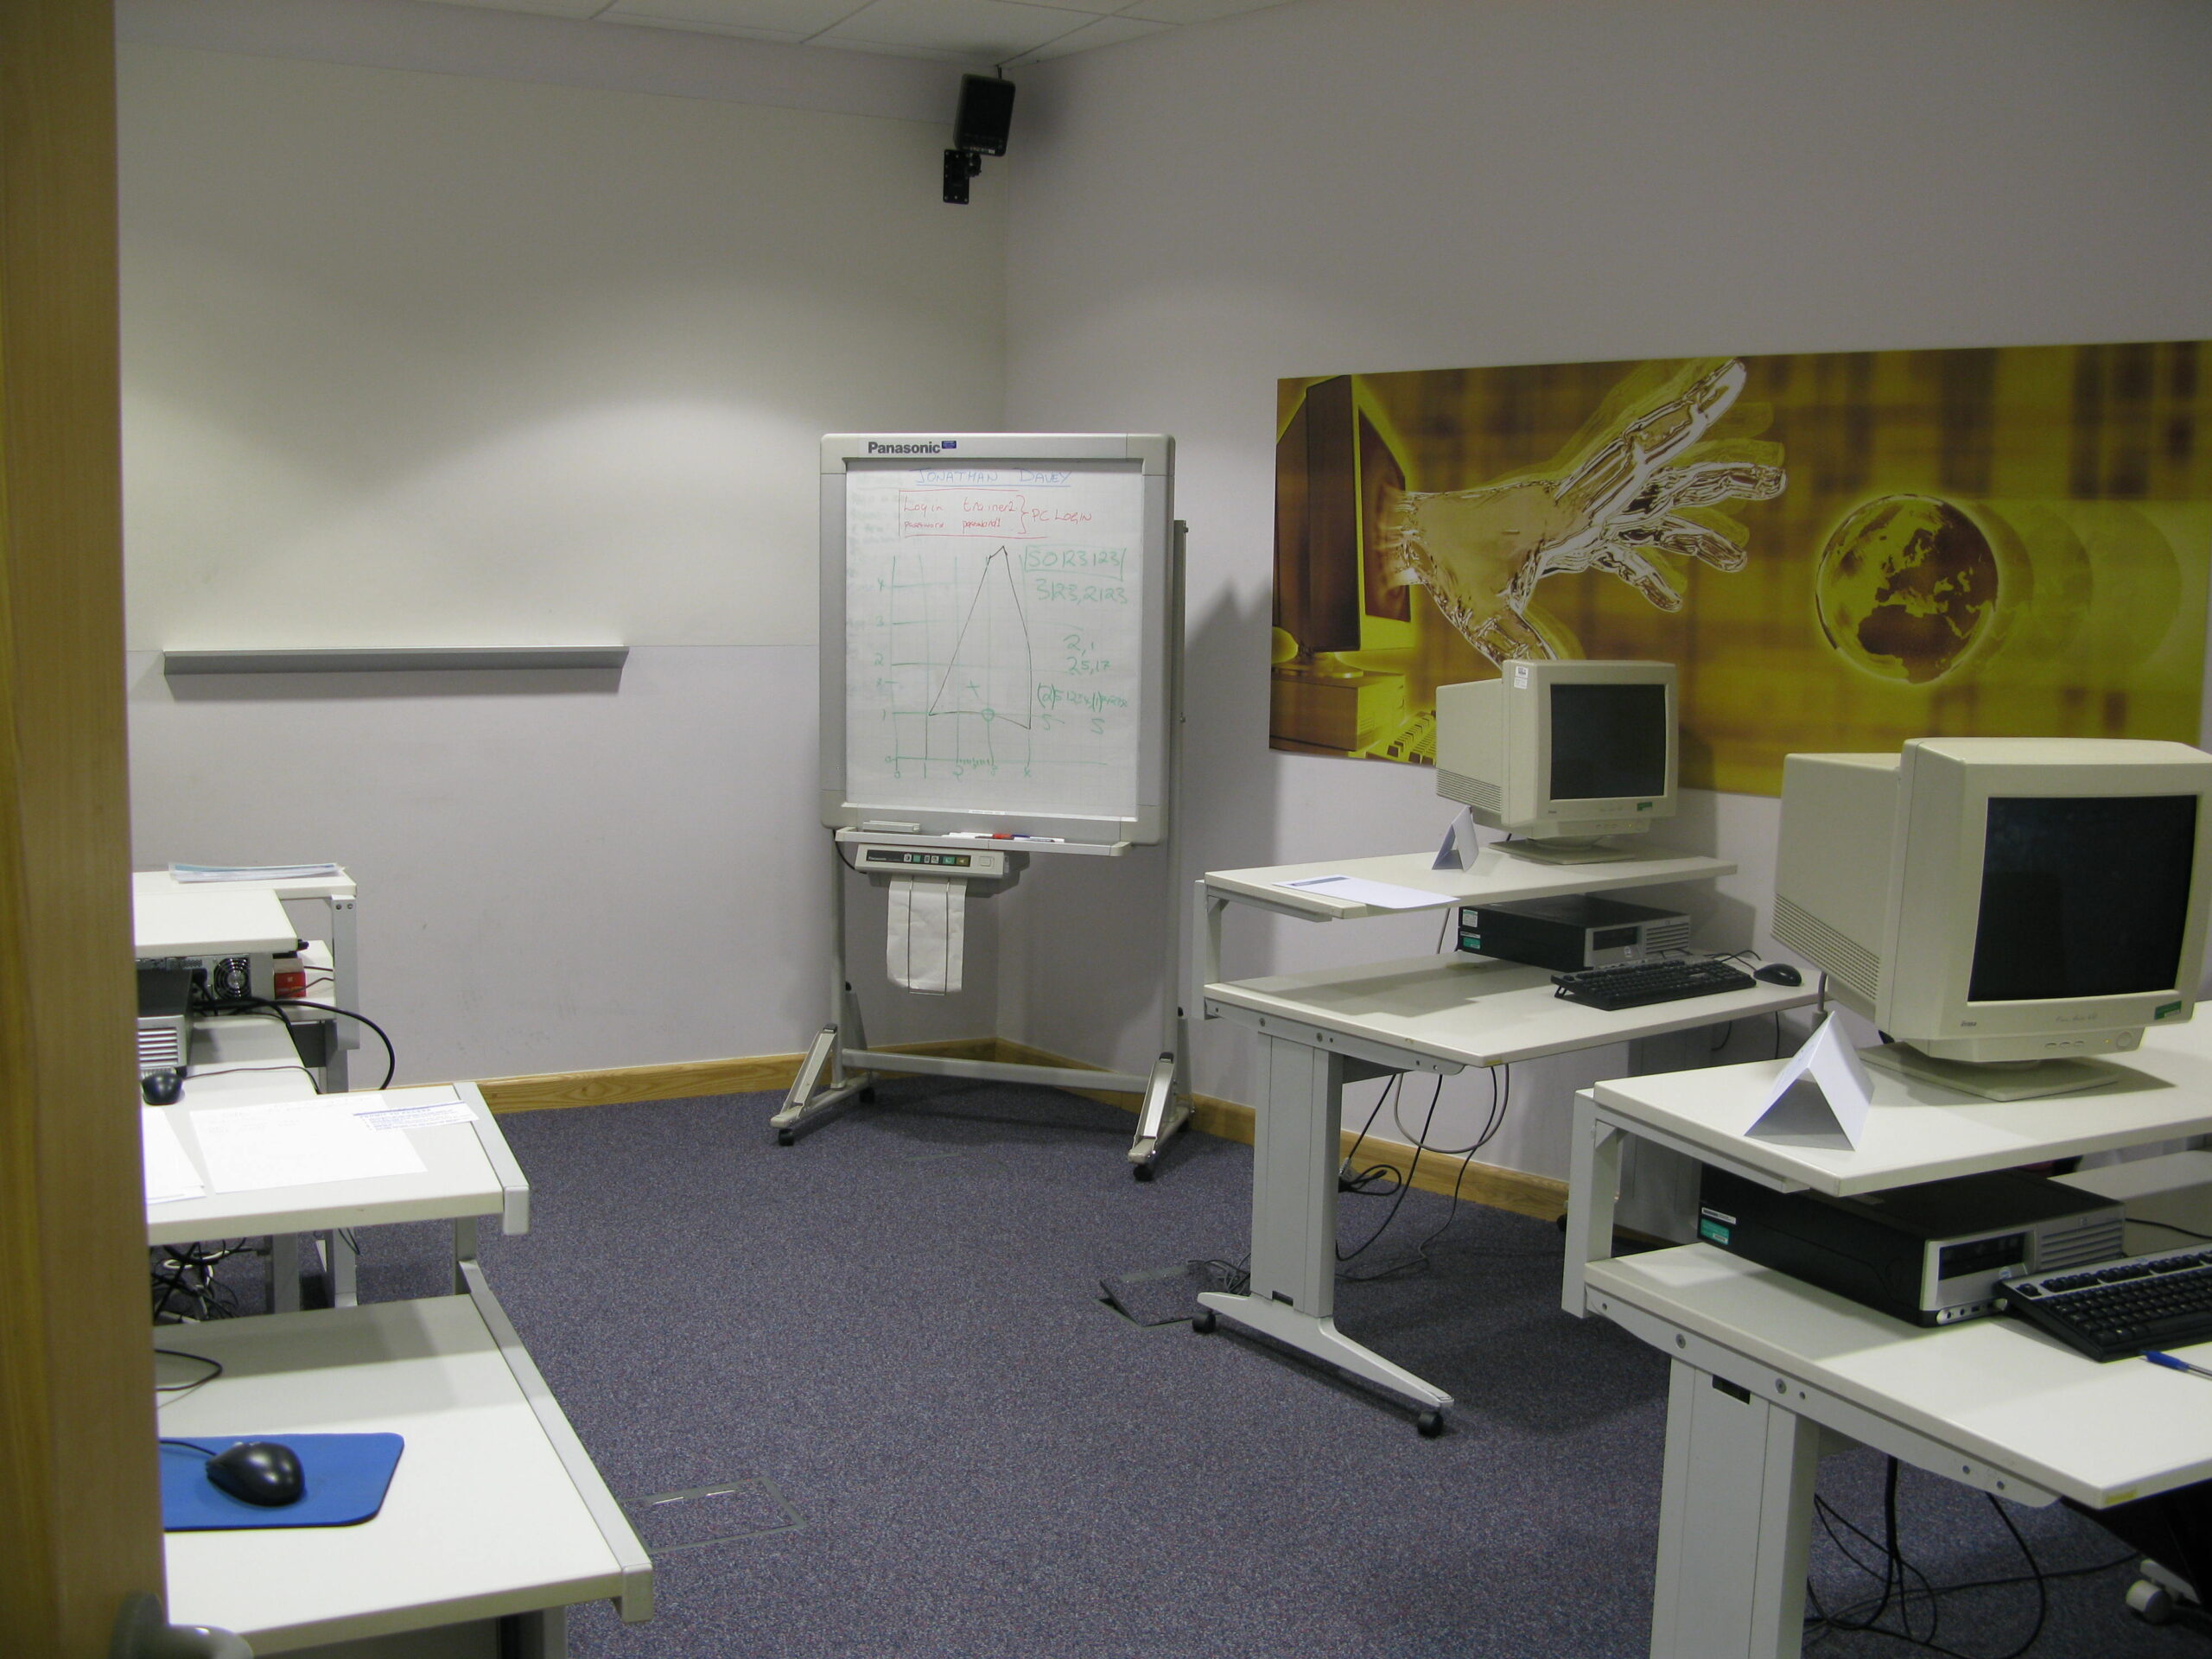 One of the Business Centre's new training rooms (C028-C030).